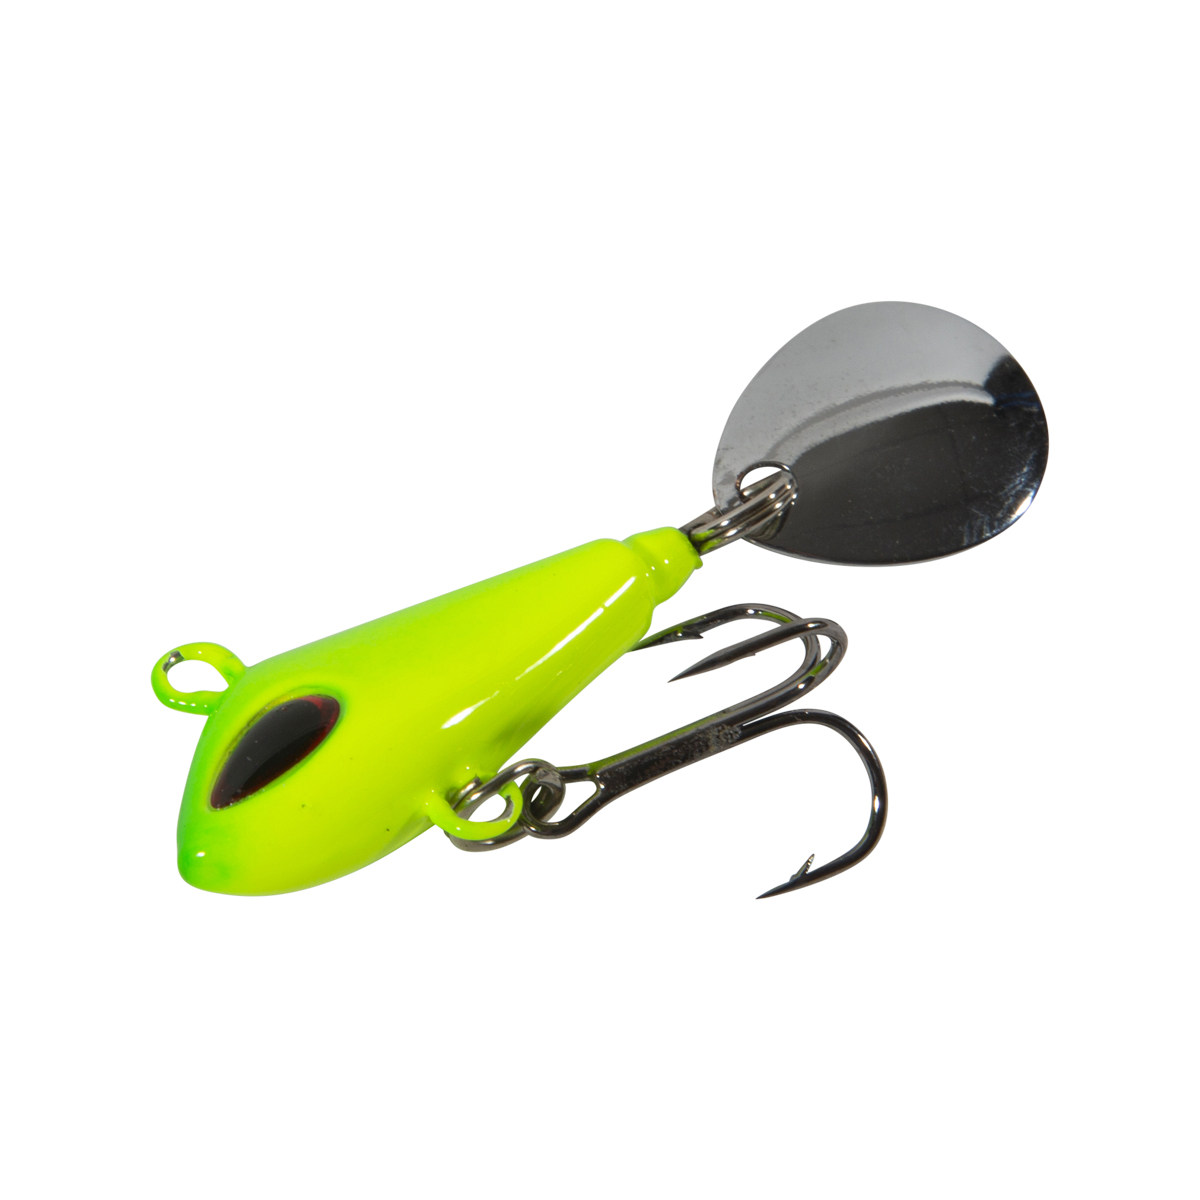 Fishing.Toys Virogo Lead Lure Spin Tail 3.3-4.0cm (12-23g) - Green/Fluo Yellow